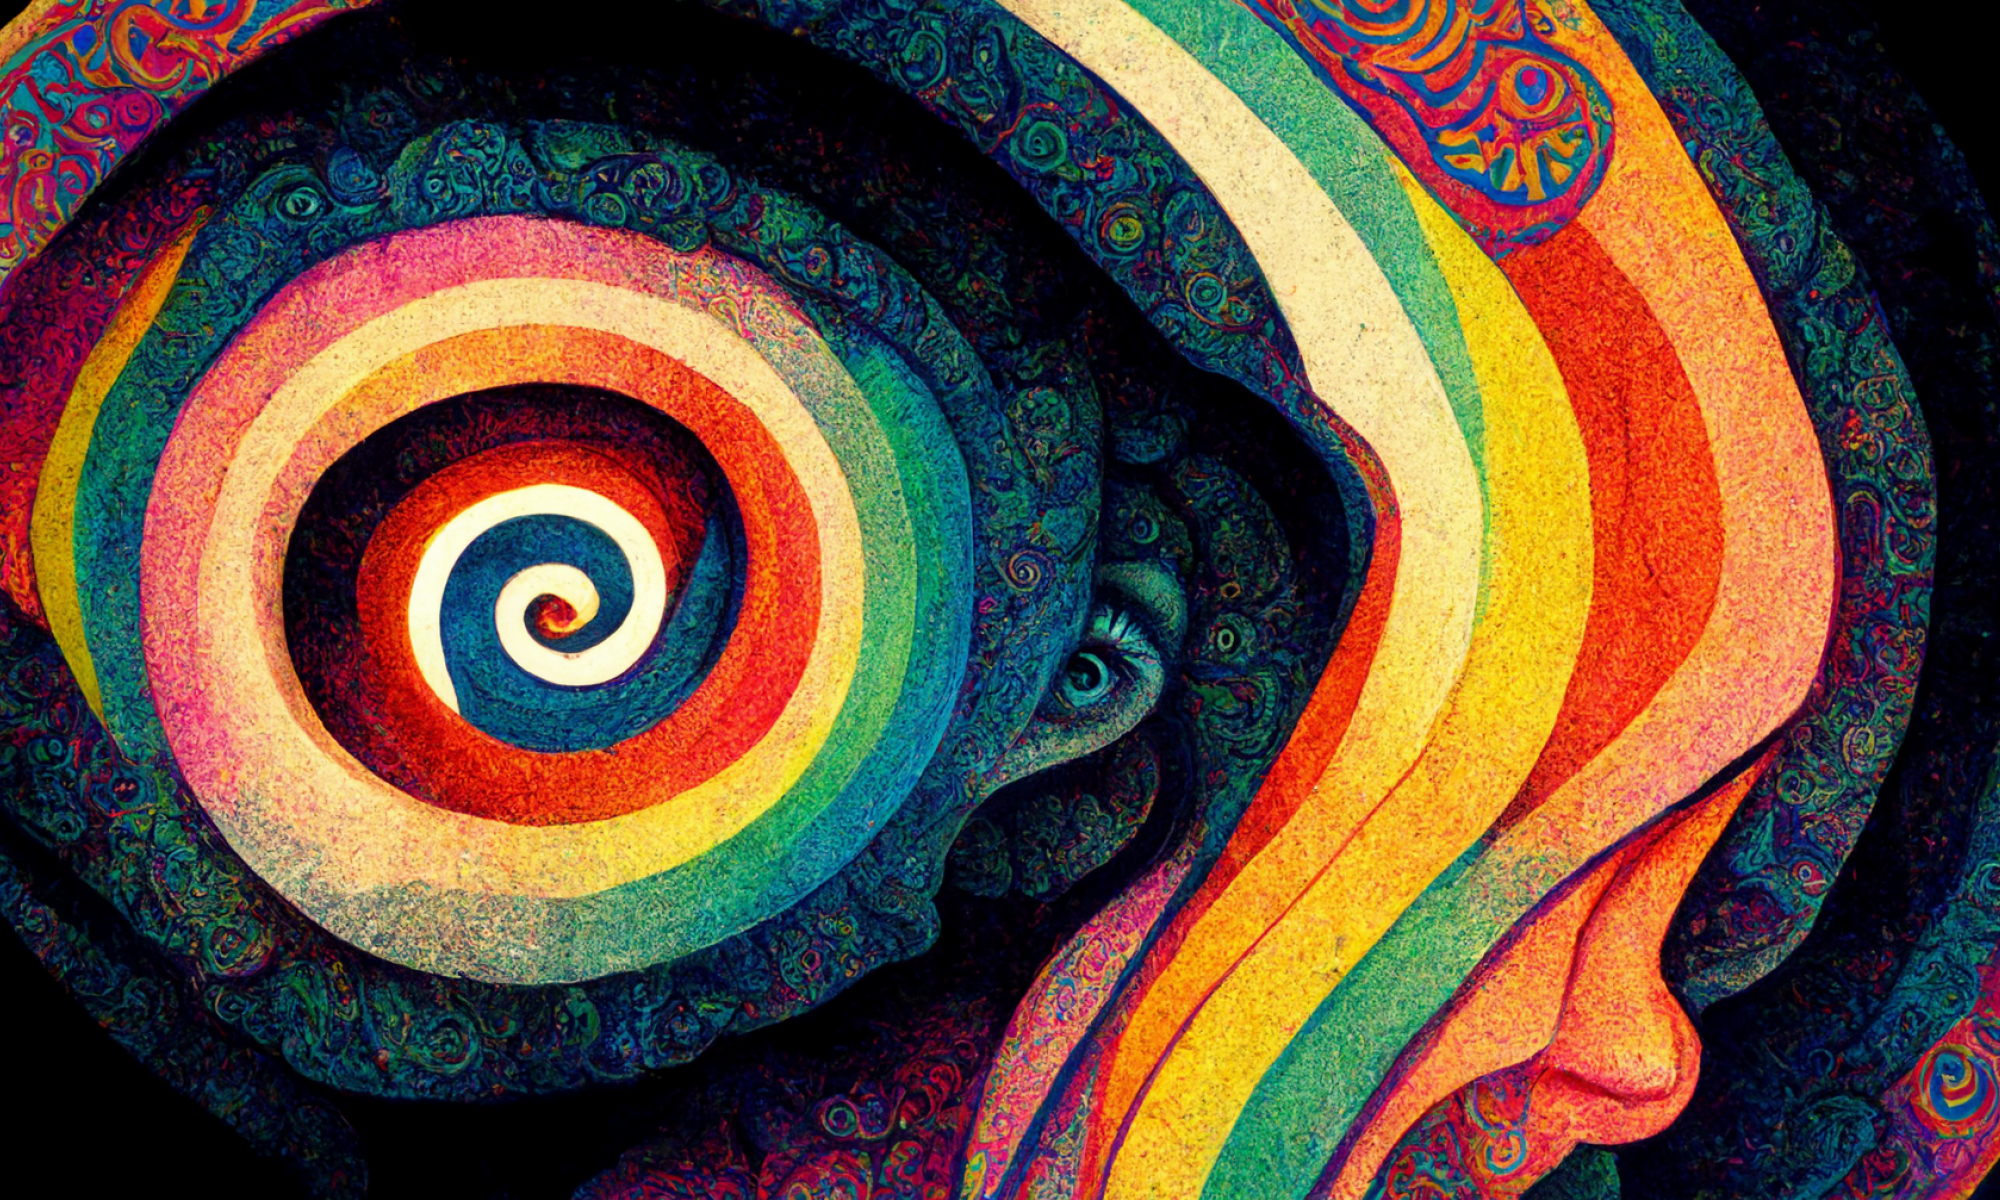 A colorful illustration of a person's head designed with spirals and mandala.